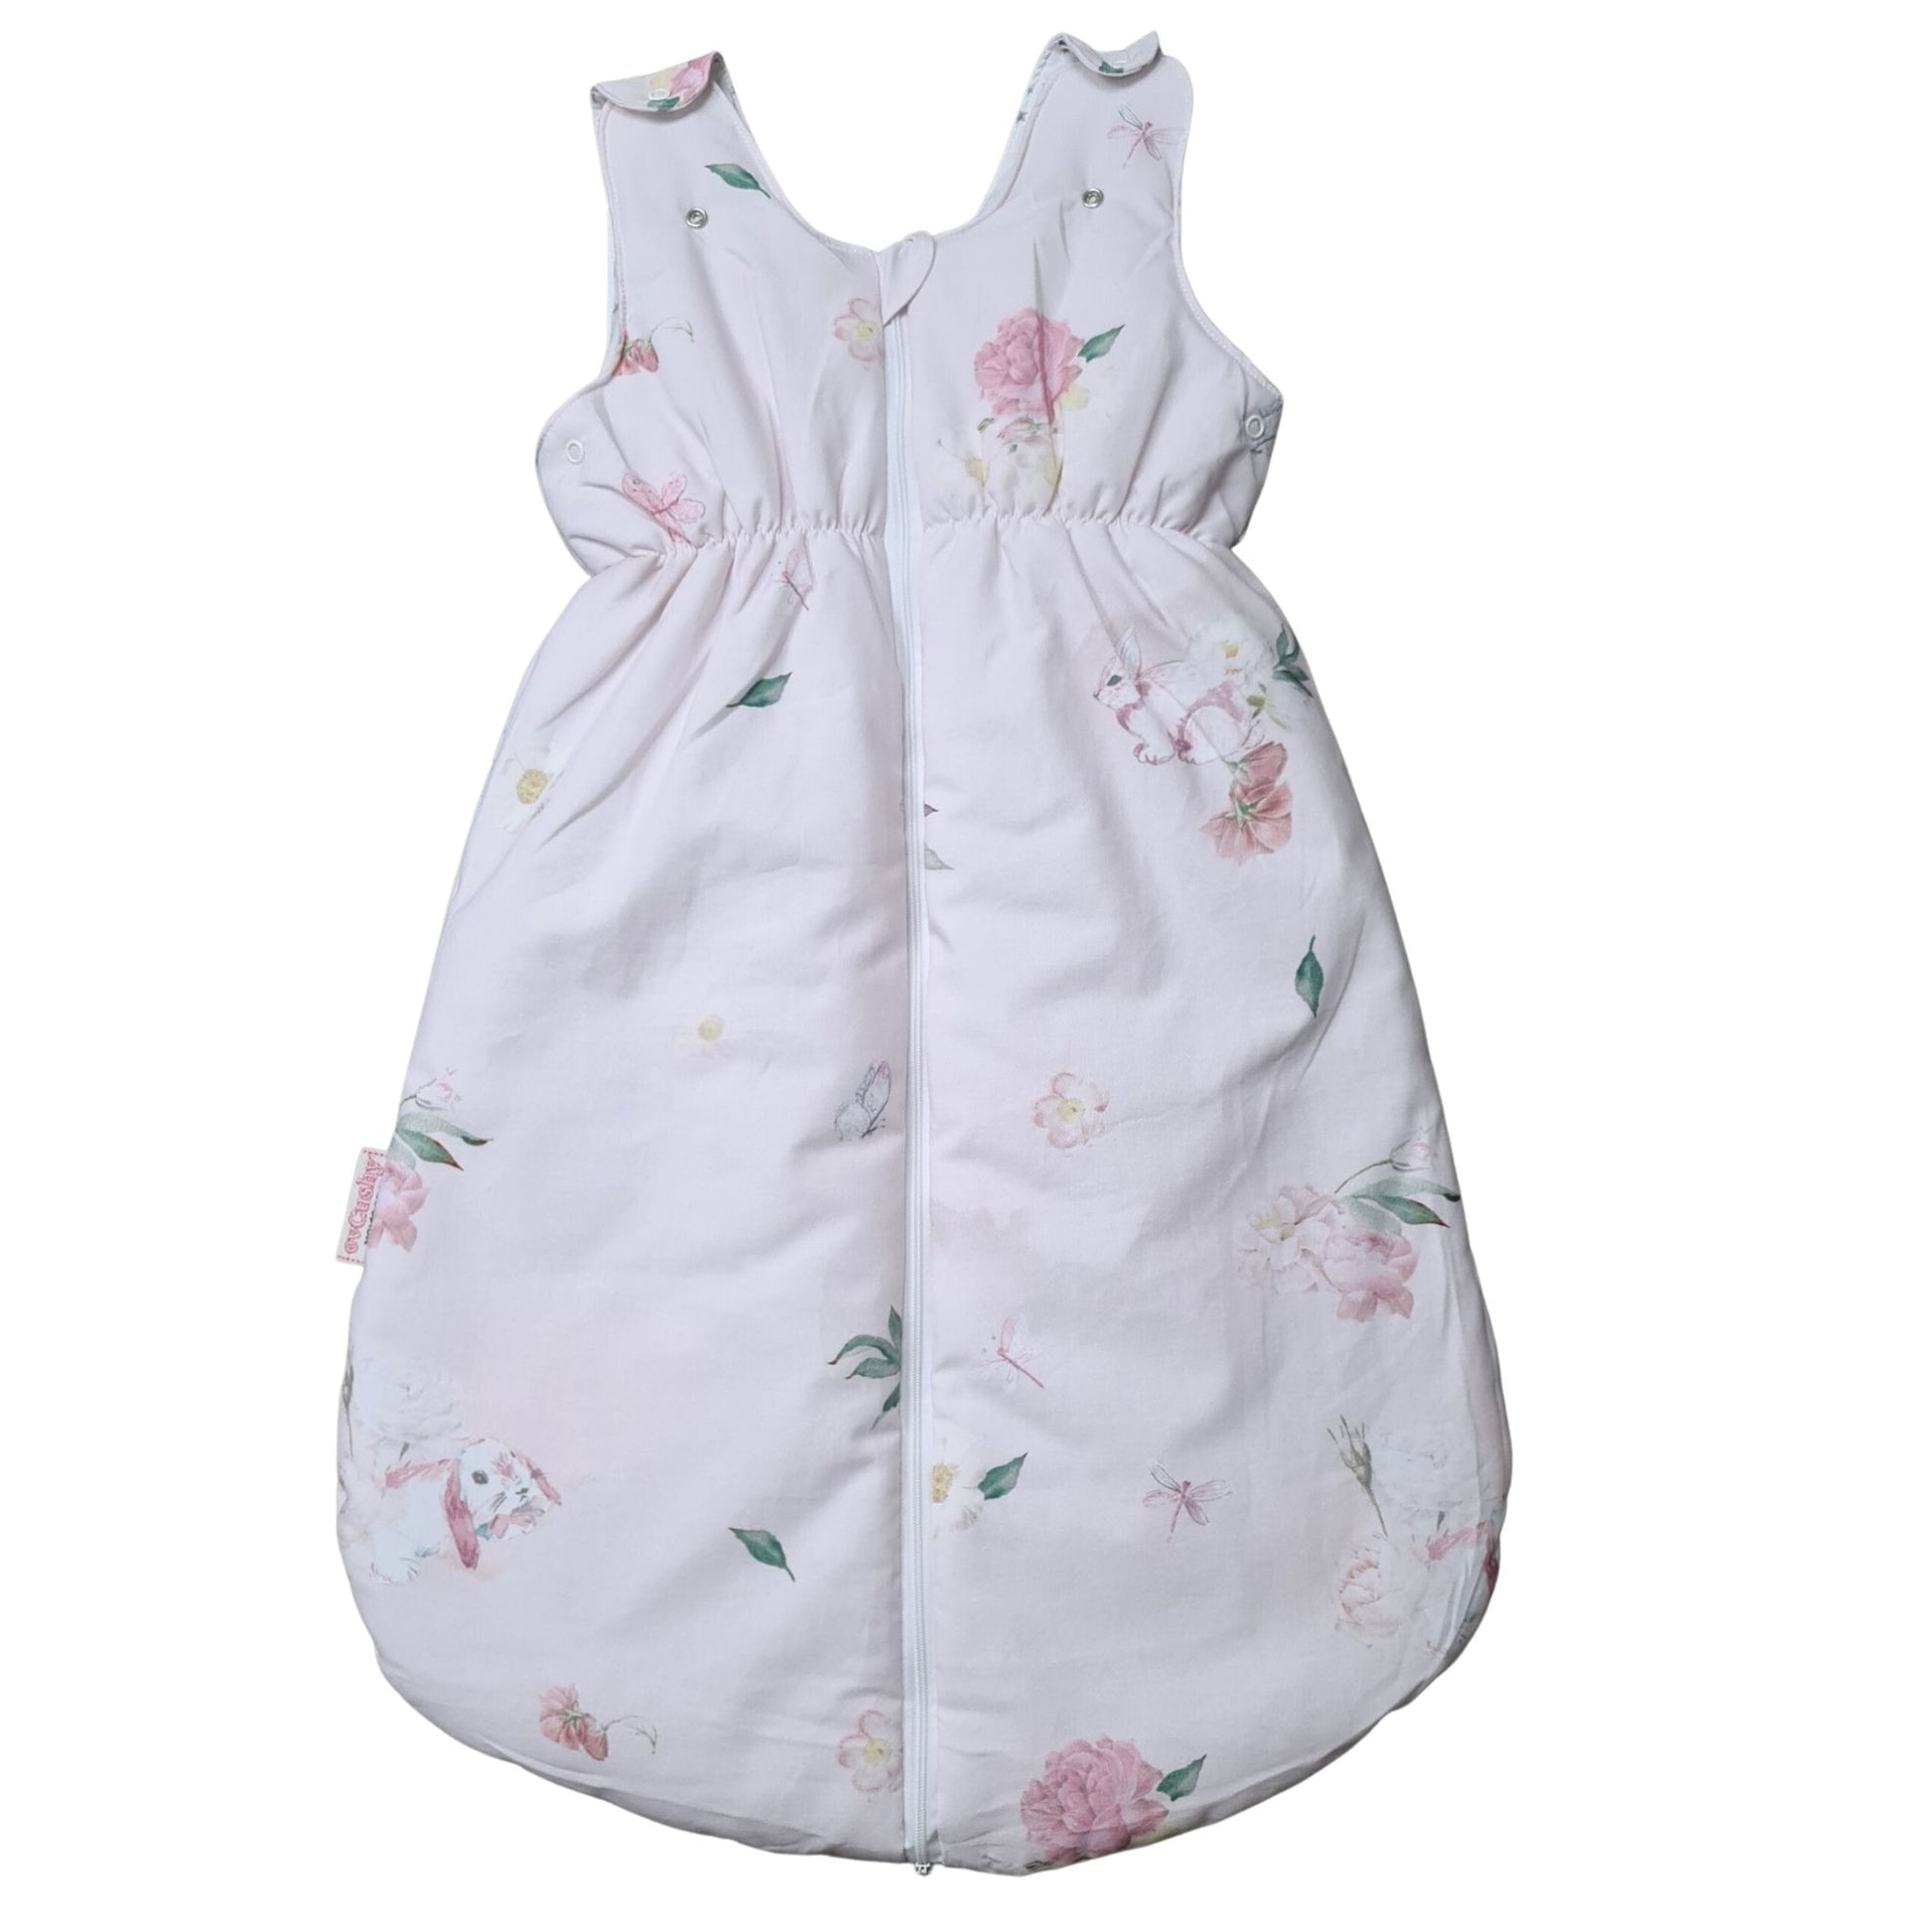 sleeping bags for baby pink with bunnies and floral pattern 2.5 tog